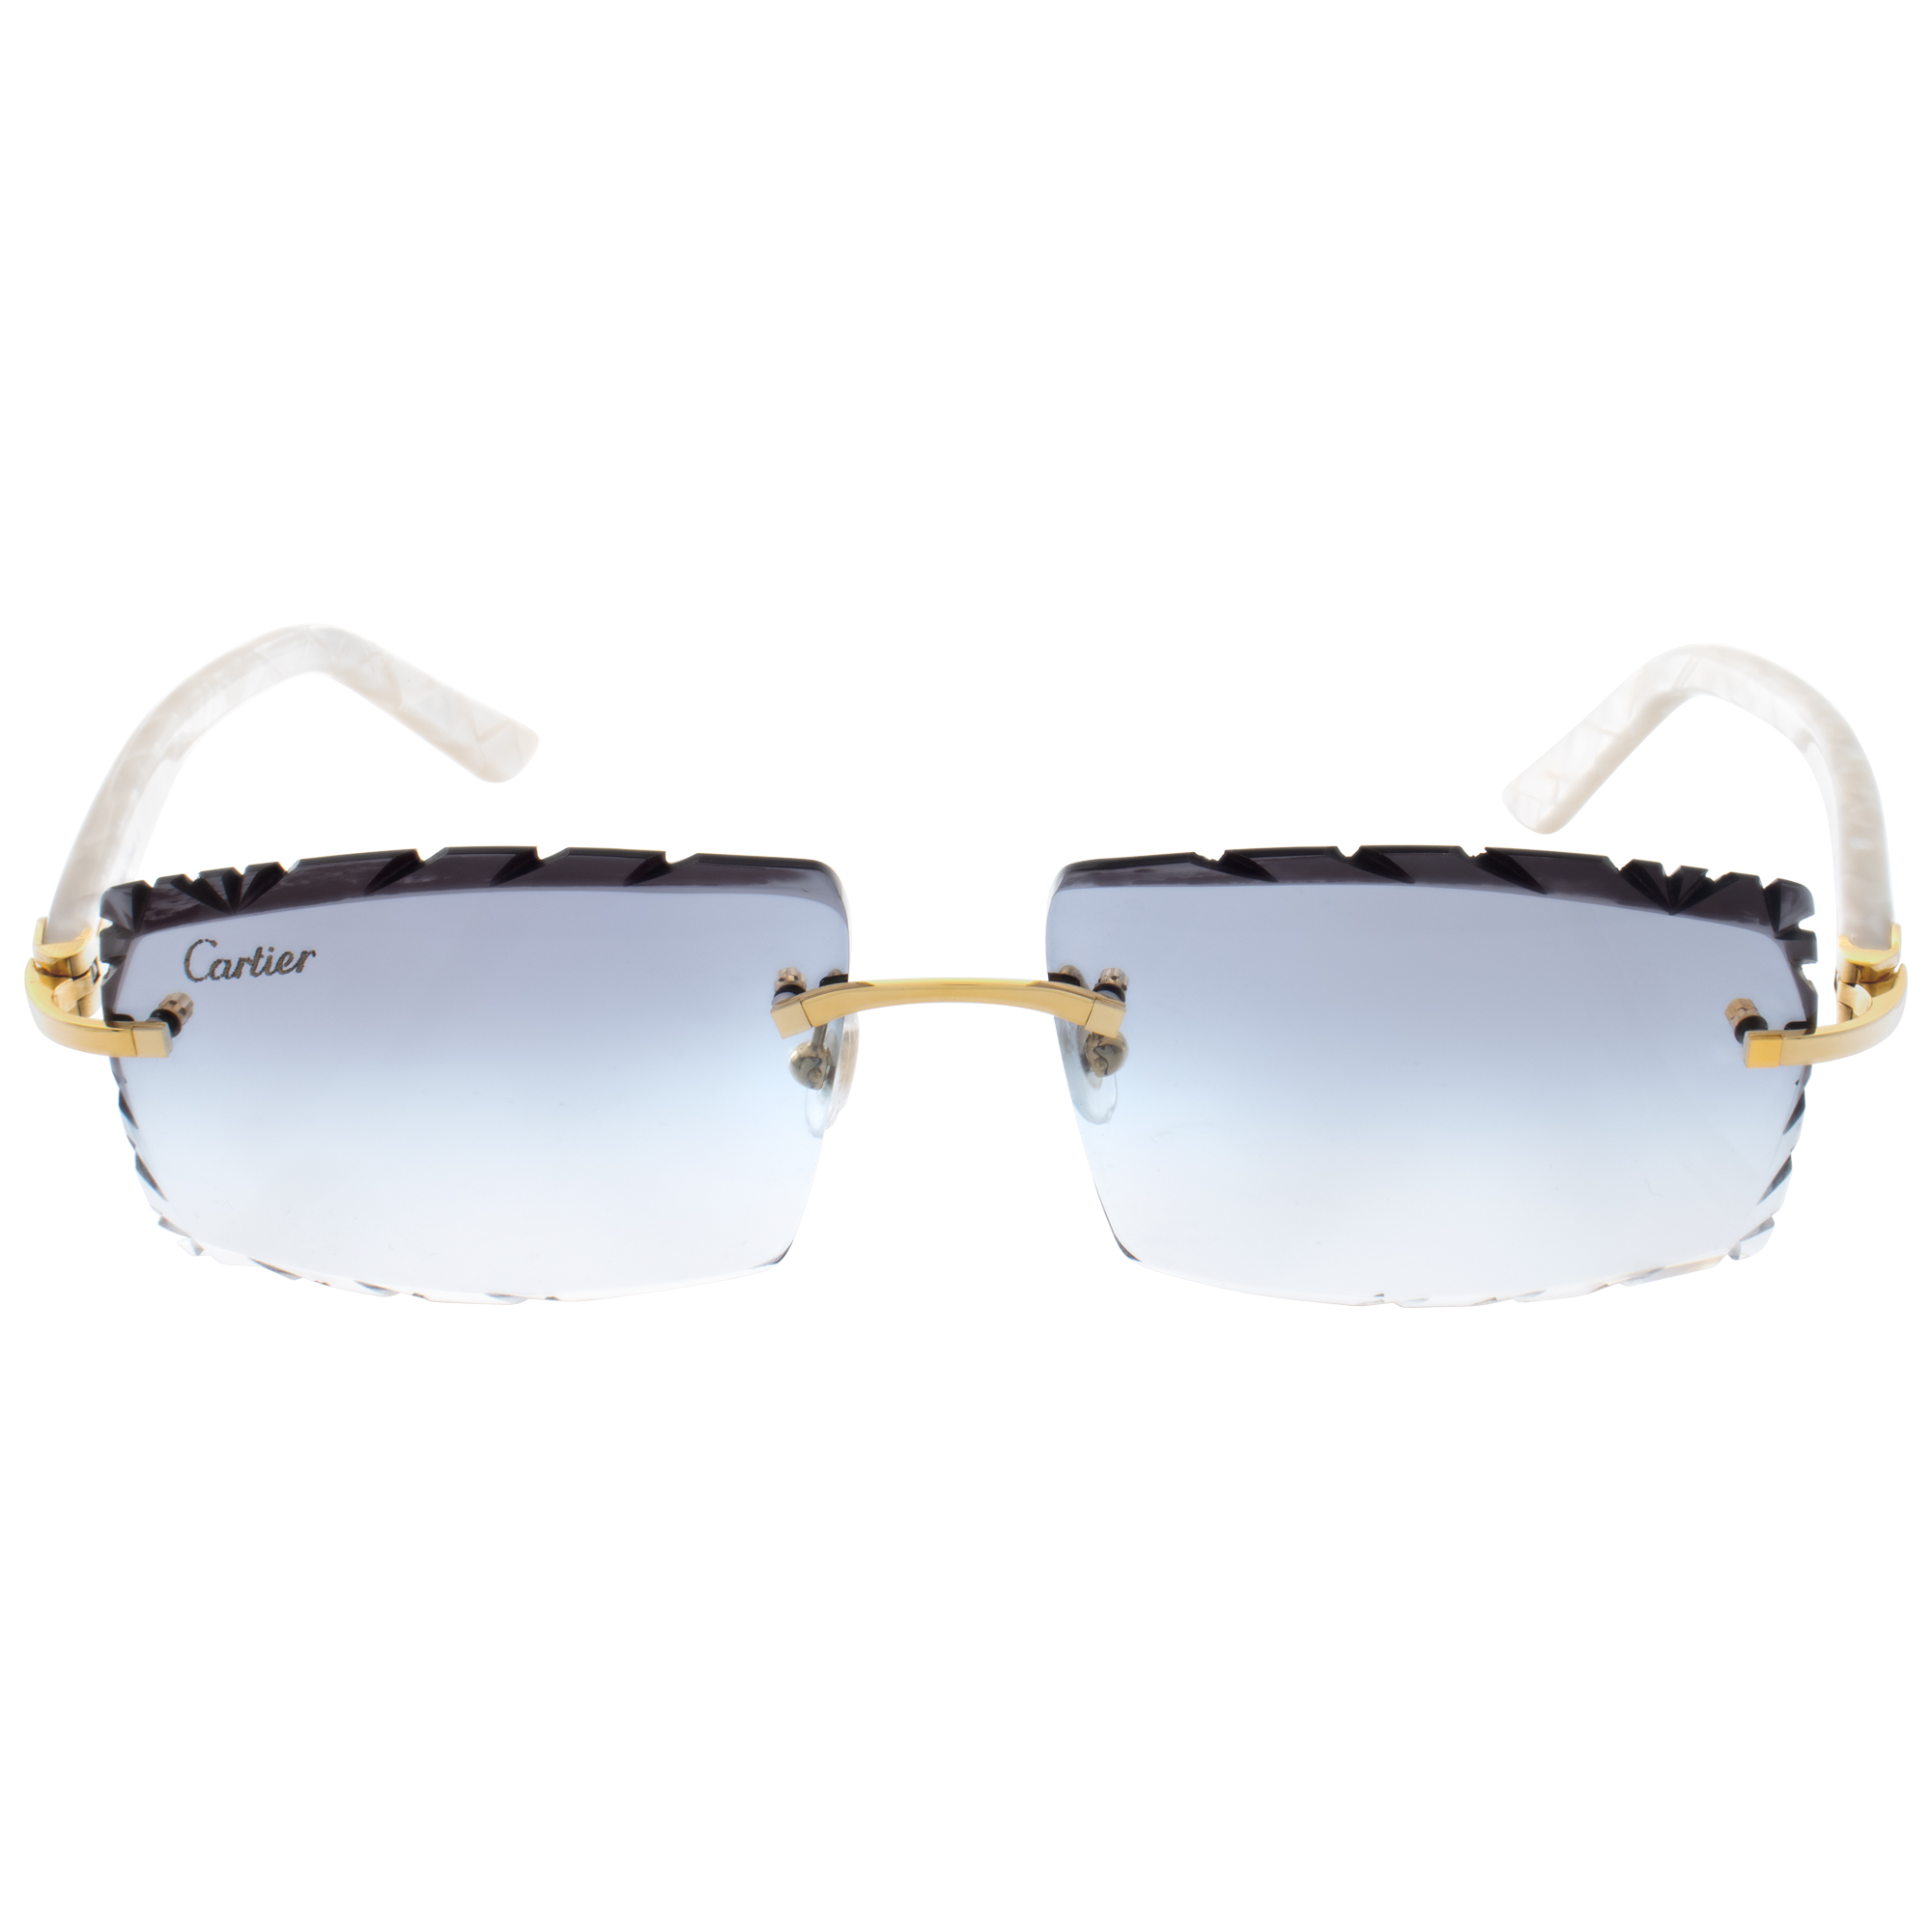 Cartier Pearl White Rimless Eyeglasses converted into sunglasses with beveled blue lens